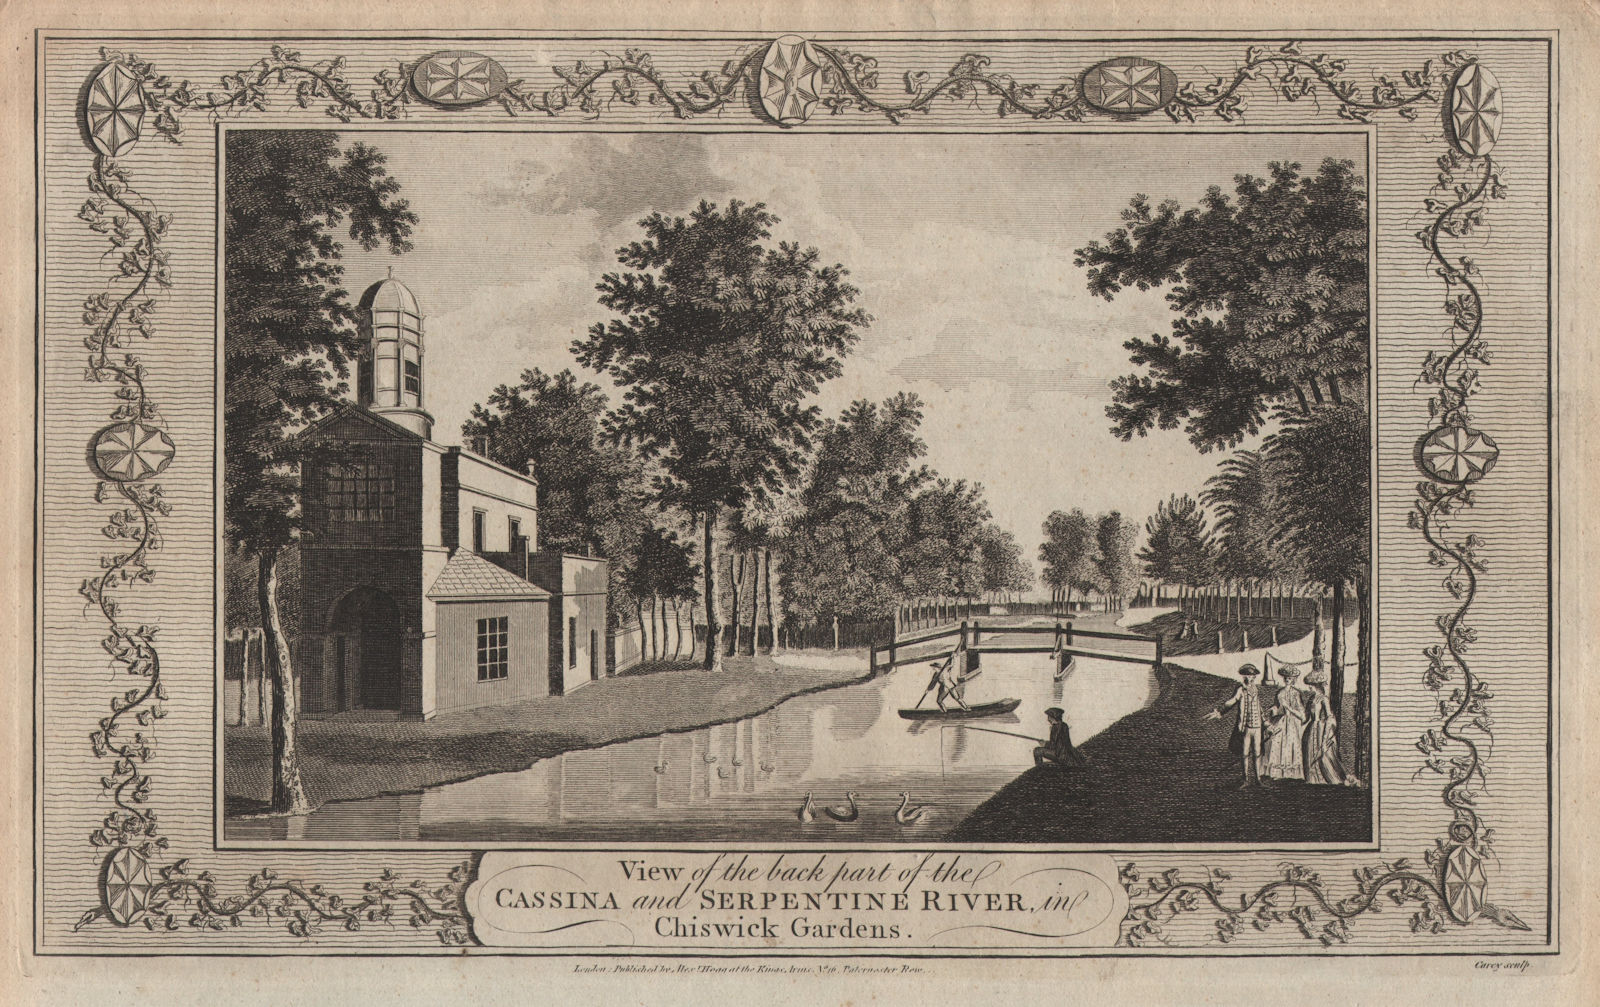 Associate Product The Cassina and Serpentine River, Chiswick House & Gardens. THORNTON 1784